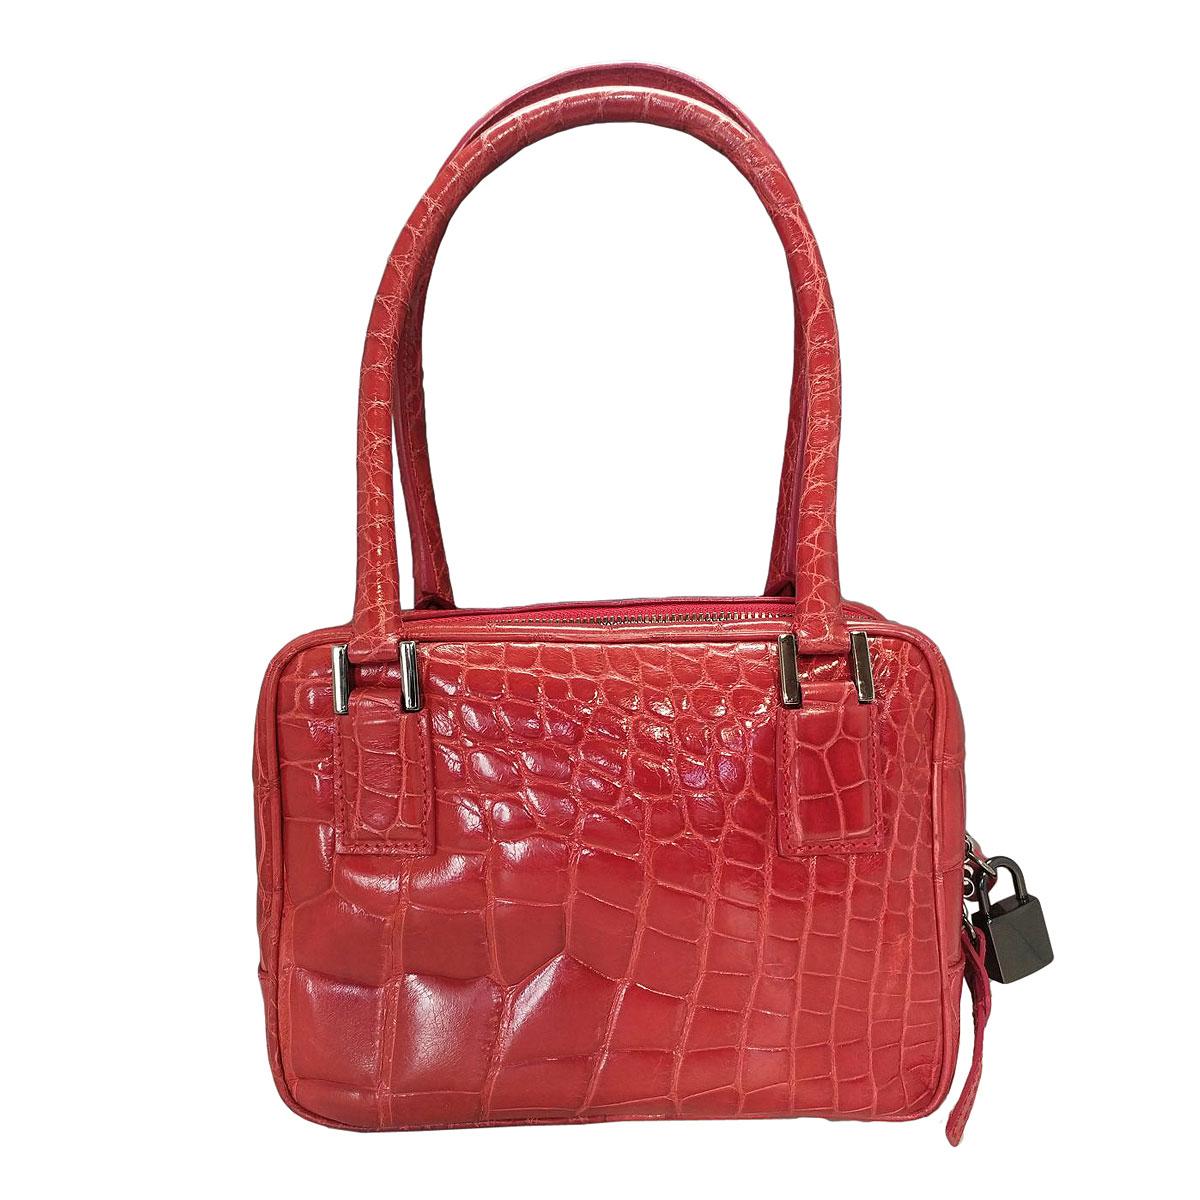 Super chic Giorgio Armani bag
Real crocodile
Red color
Two handles
Zip closure
One internal zip pocket
Additional one pocket
Interior leather lining
Cm 20 x 15 x 7 (7,87 x 5,90 x 2,75 inches)
Presence of few spots on the outside, see